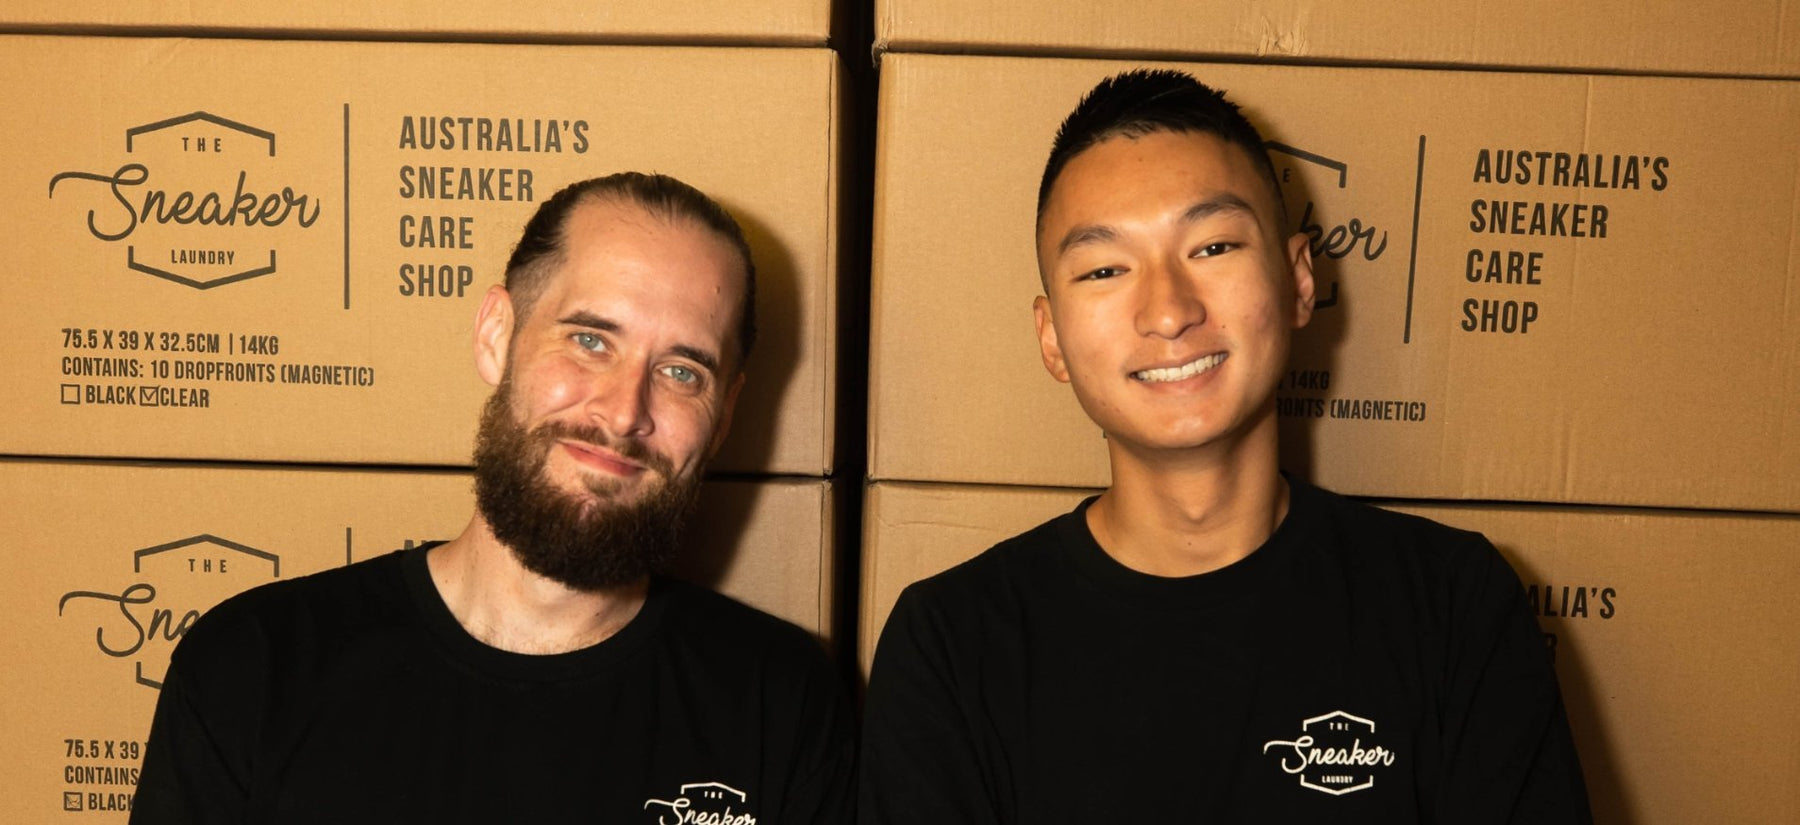 Conversations with Co-Founders of The Sneaker Laundry - The Sneaker Laundry